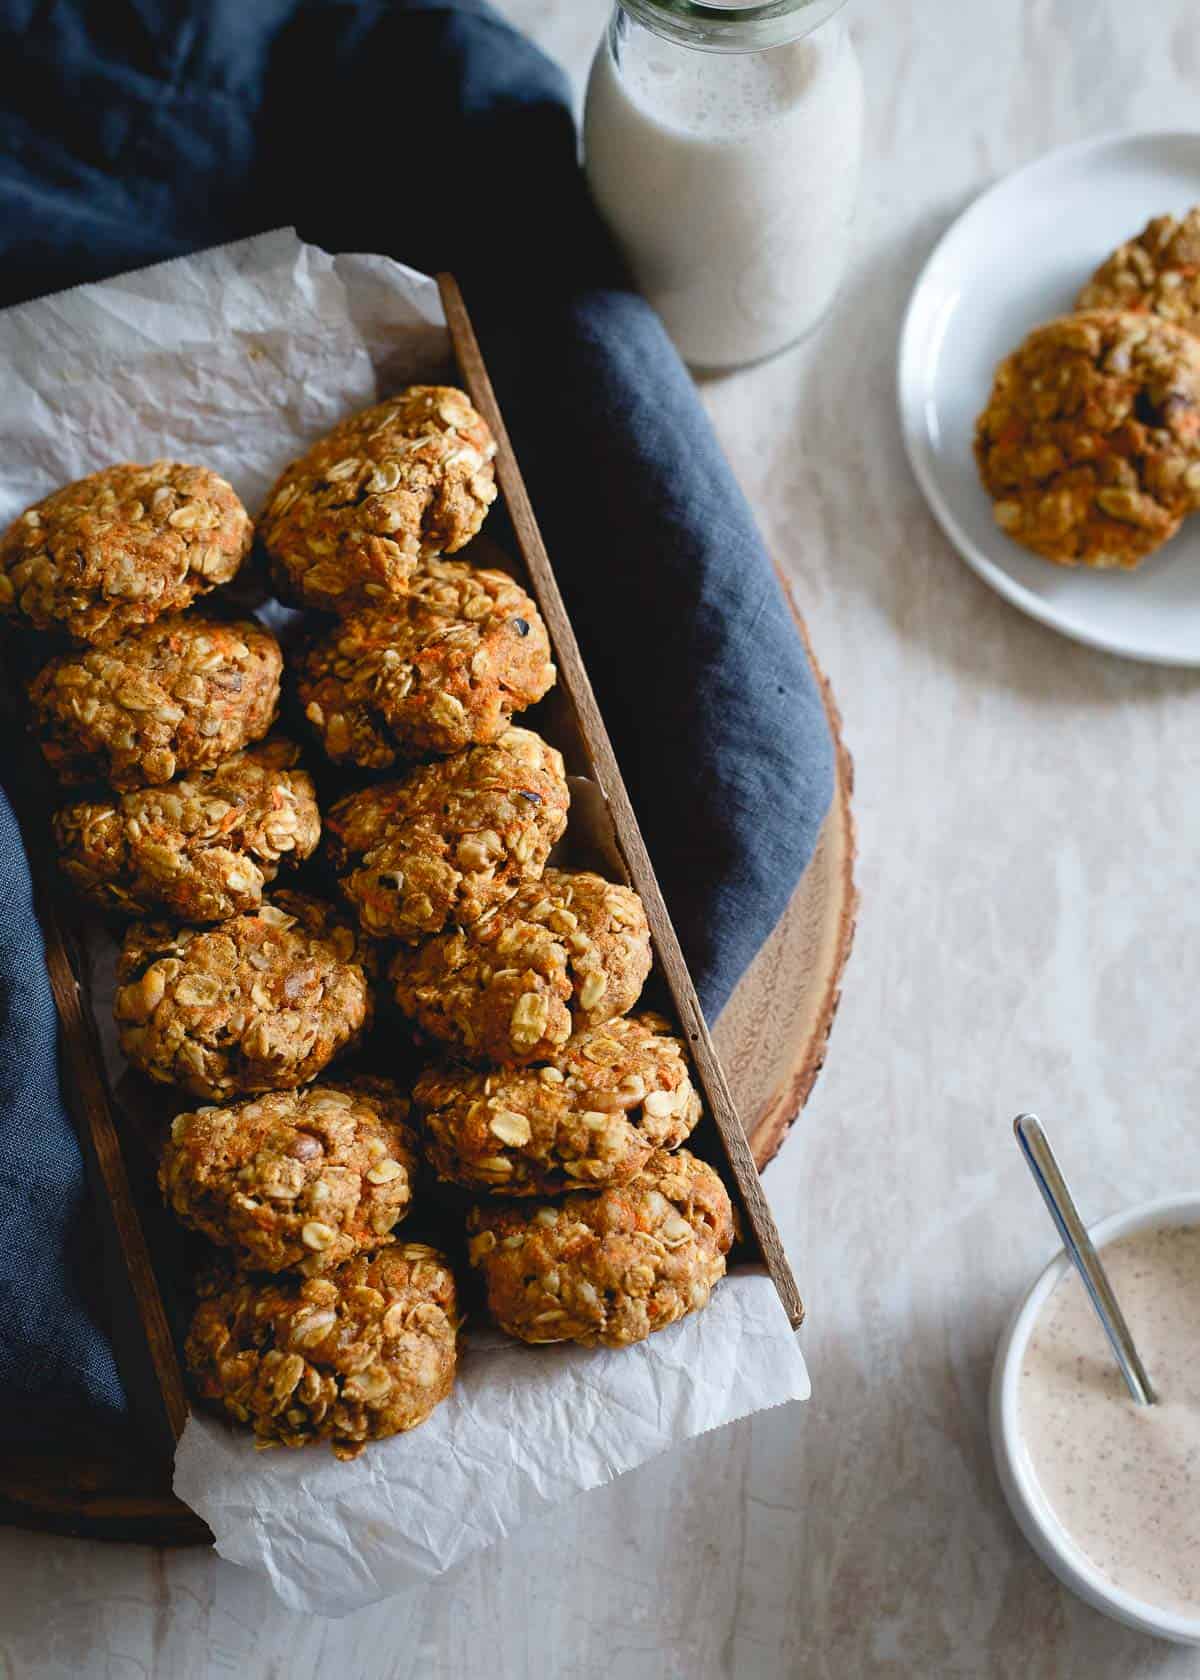 These healthy carrot cake cookies made with oats and whole wheat flour are packed with raisins, walnuts, lemon zest and ginger. Drizzle them with the optional almond butter cream cheese topping for a true creamy carrot cake like bite. No added sugar, no butter, still completely delicious and guilt-free.